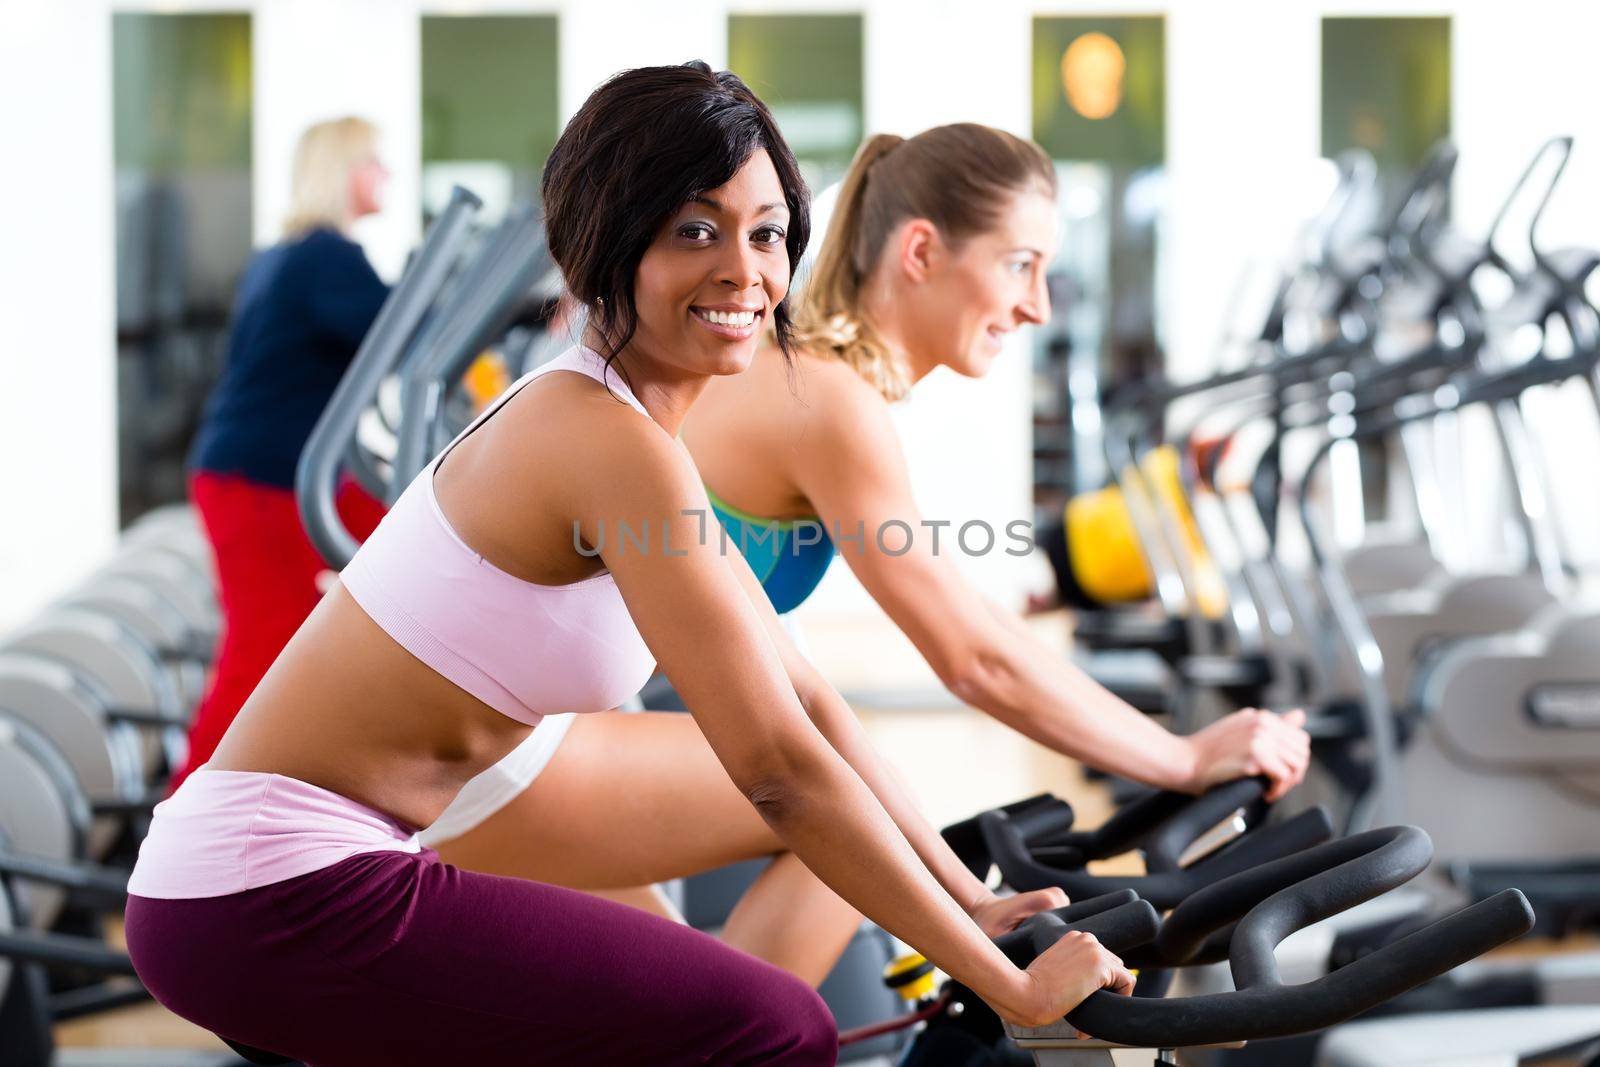 People Spinning in the gym on bicycles by Kzenon